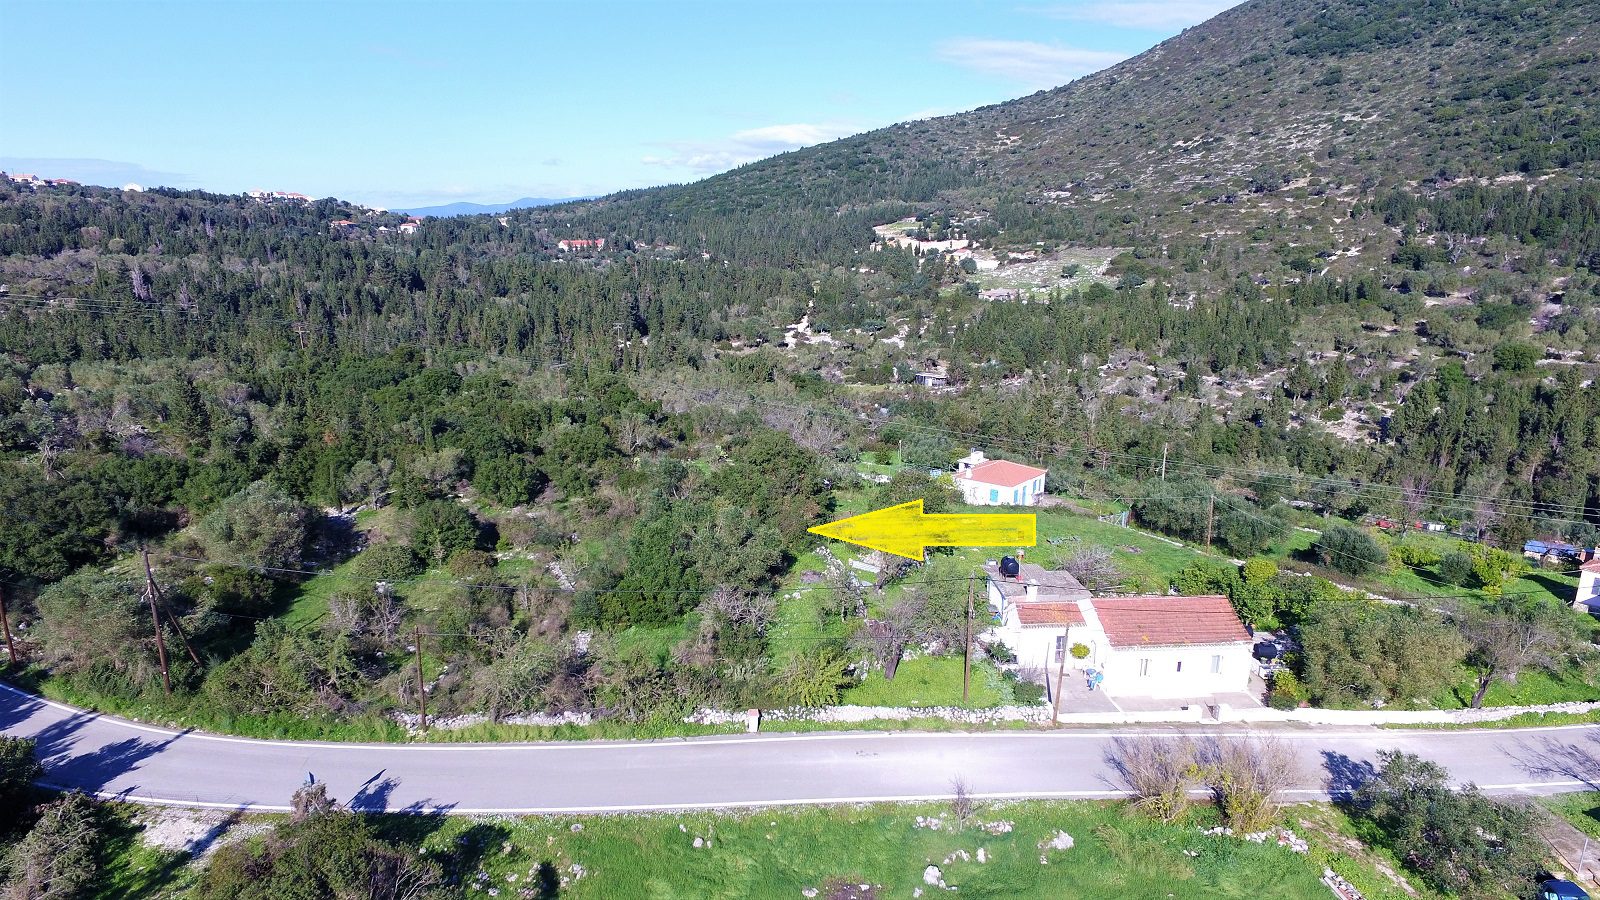 Aerial view of land for sale Ithaca Greece, Lahos